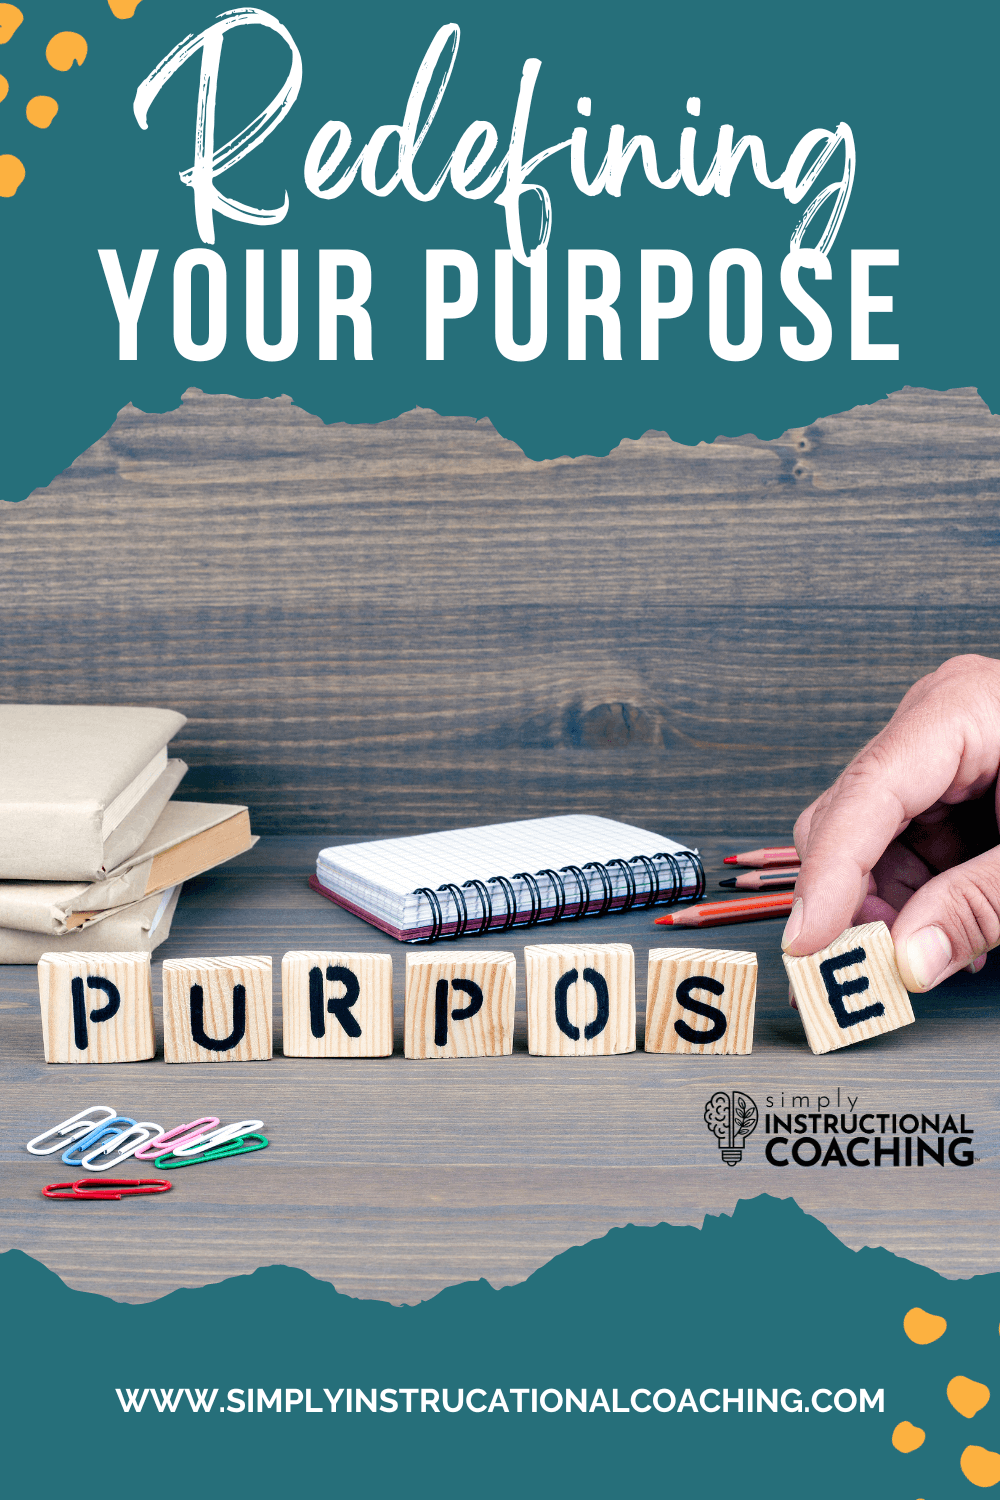 Redefining your purpose as an instructional coach